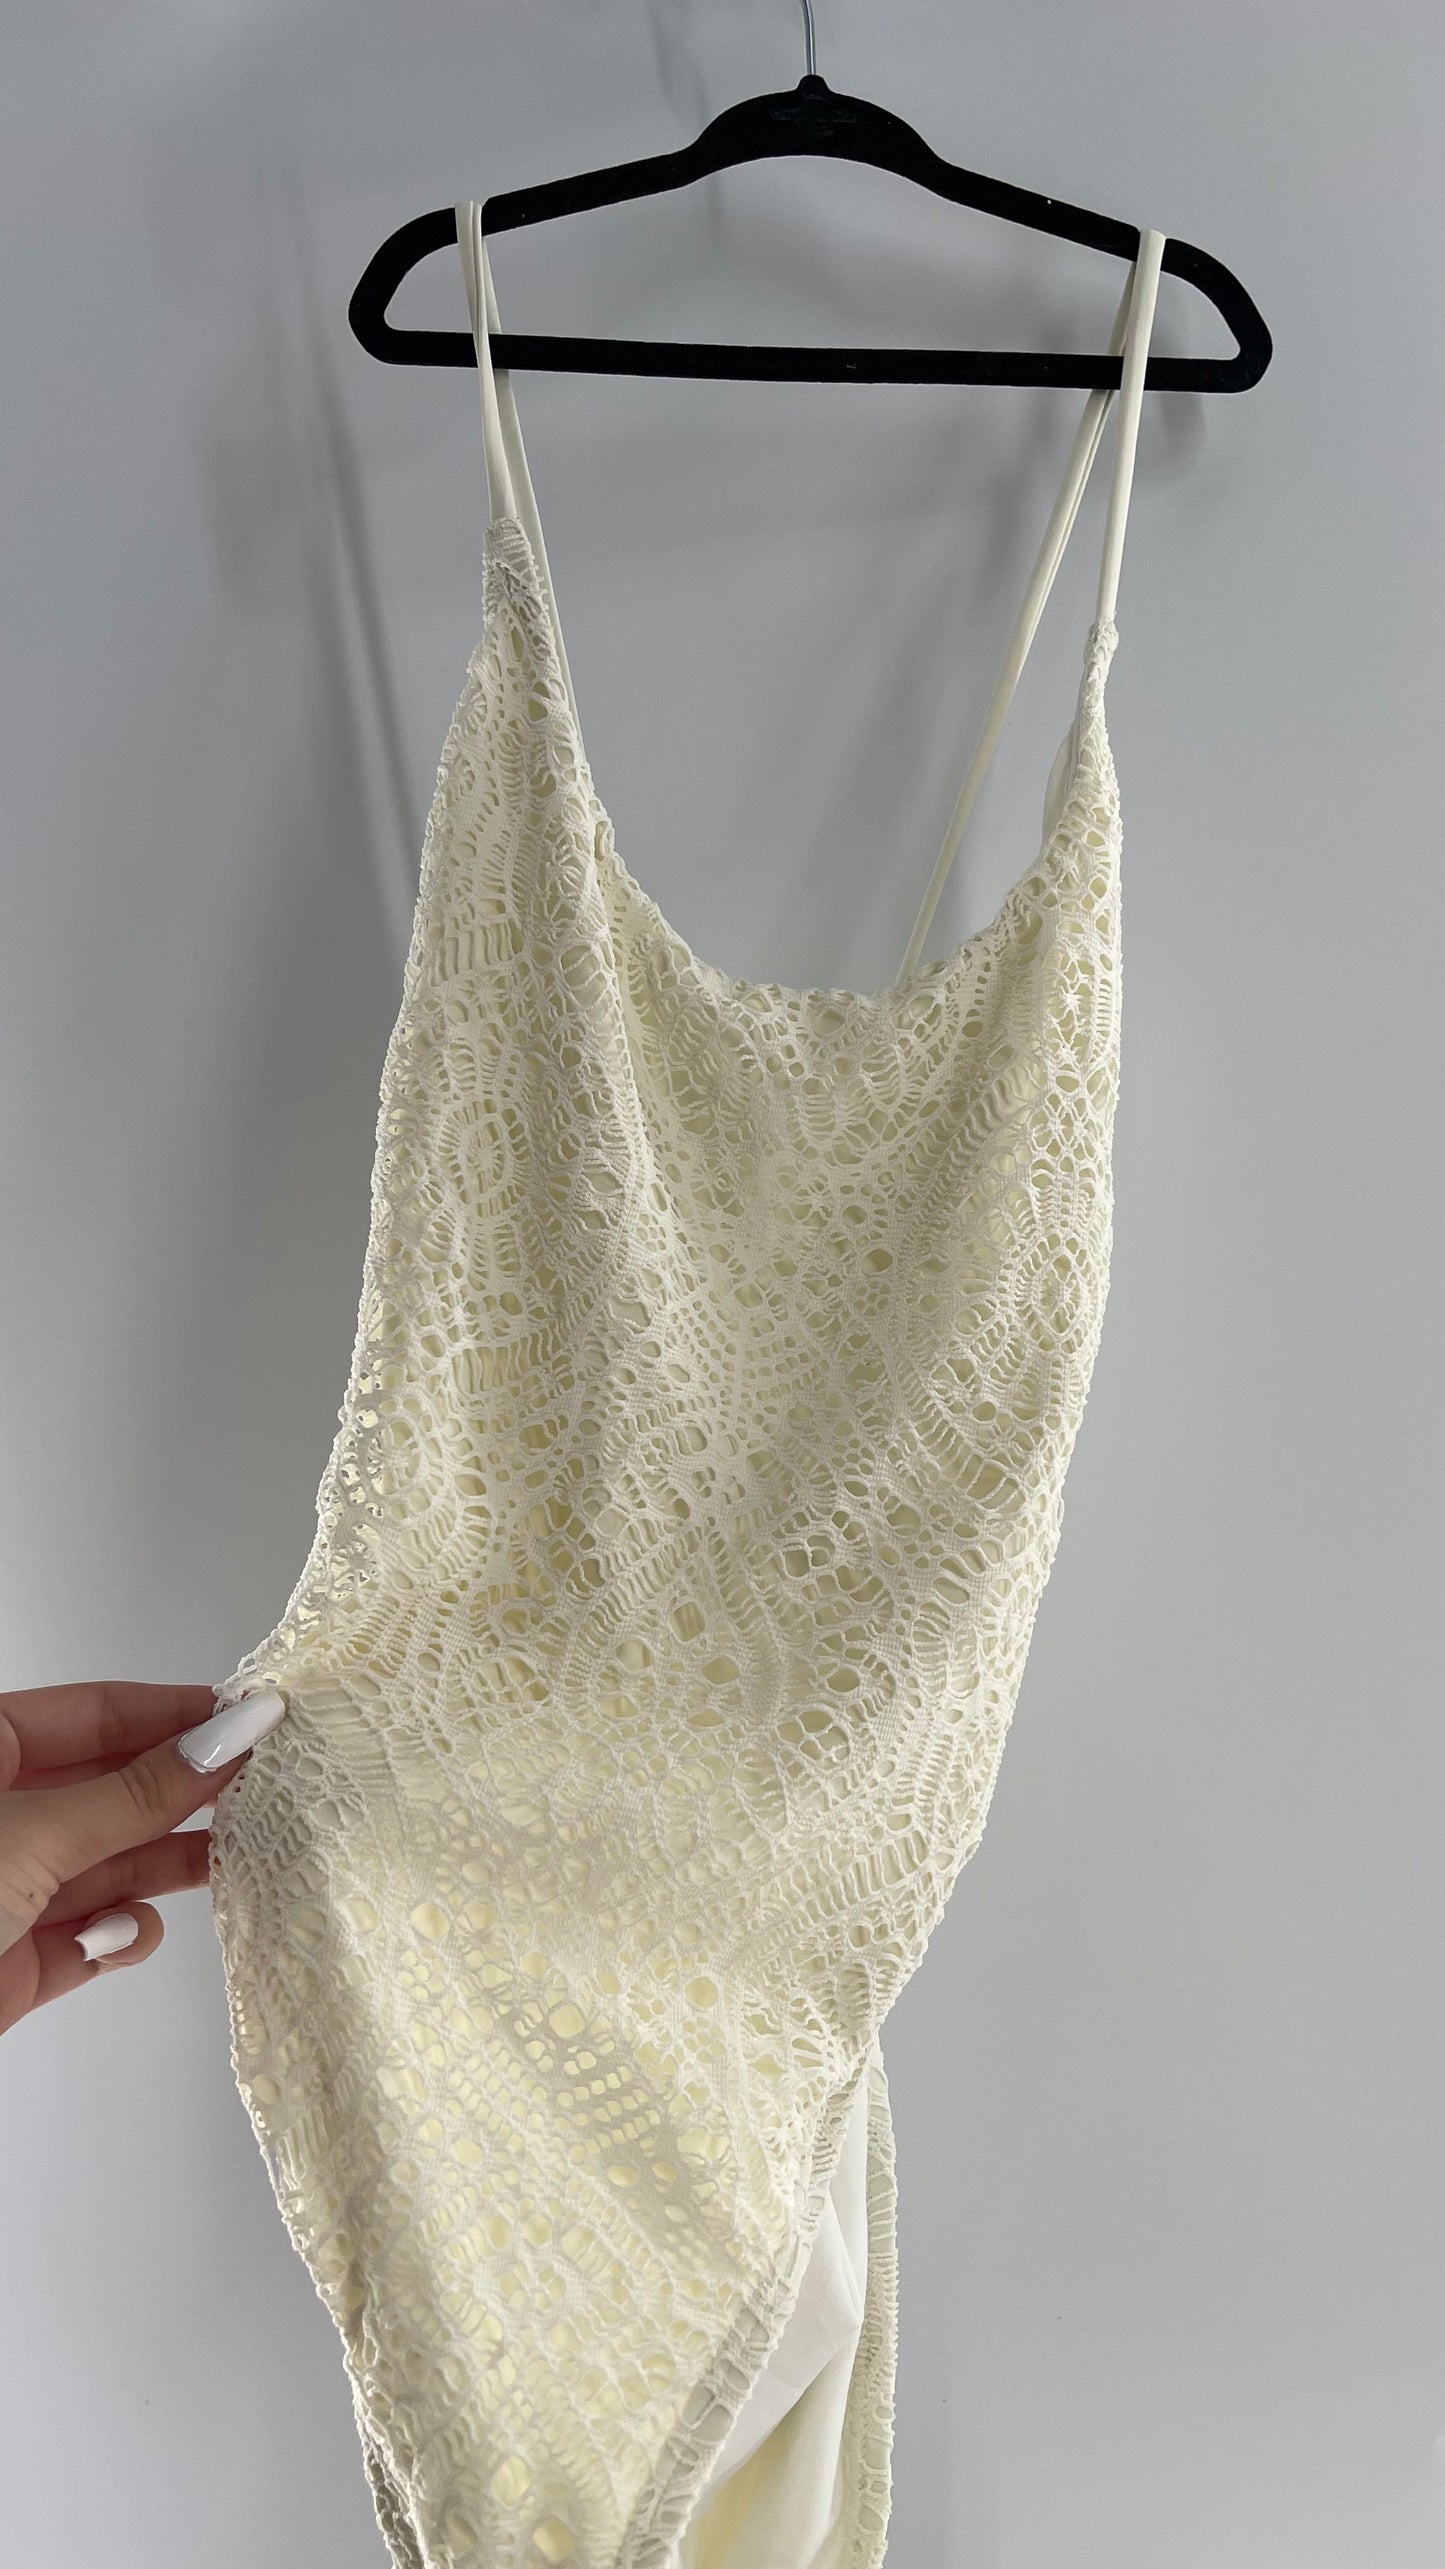 Urban Outfitters White Lace/Crochet Swimsuit with Lace Up Open Back (Medium)